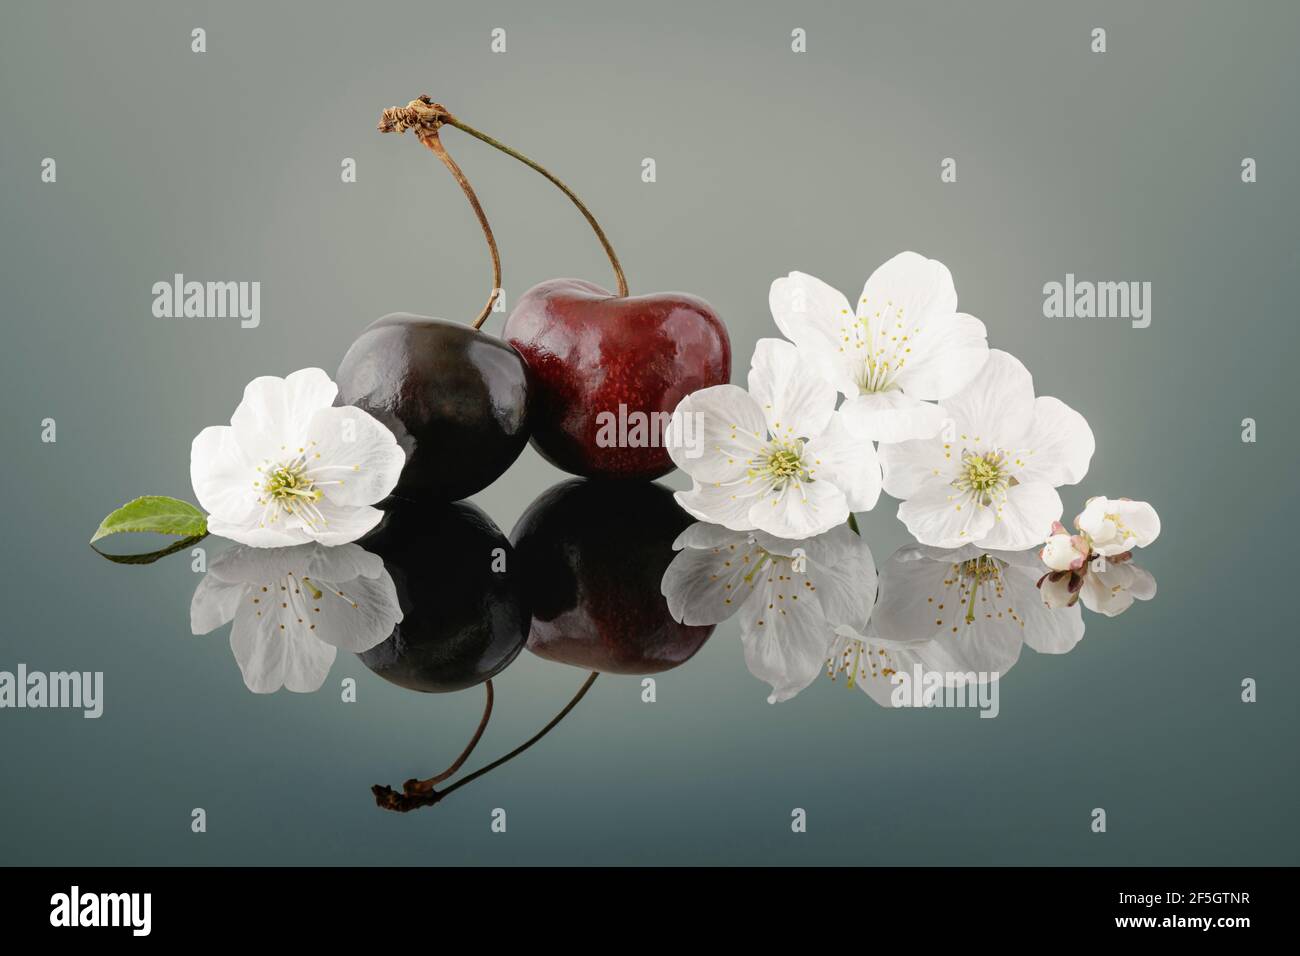 Juicy red Cherries with Cherrie blossom Stock Photo